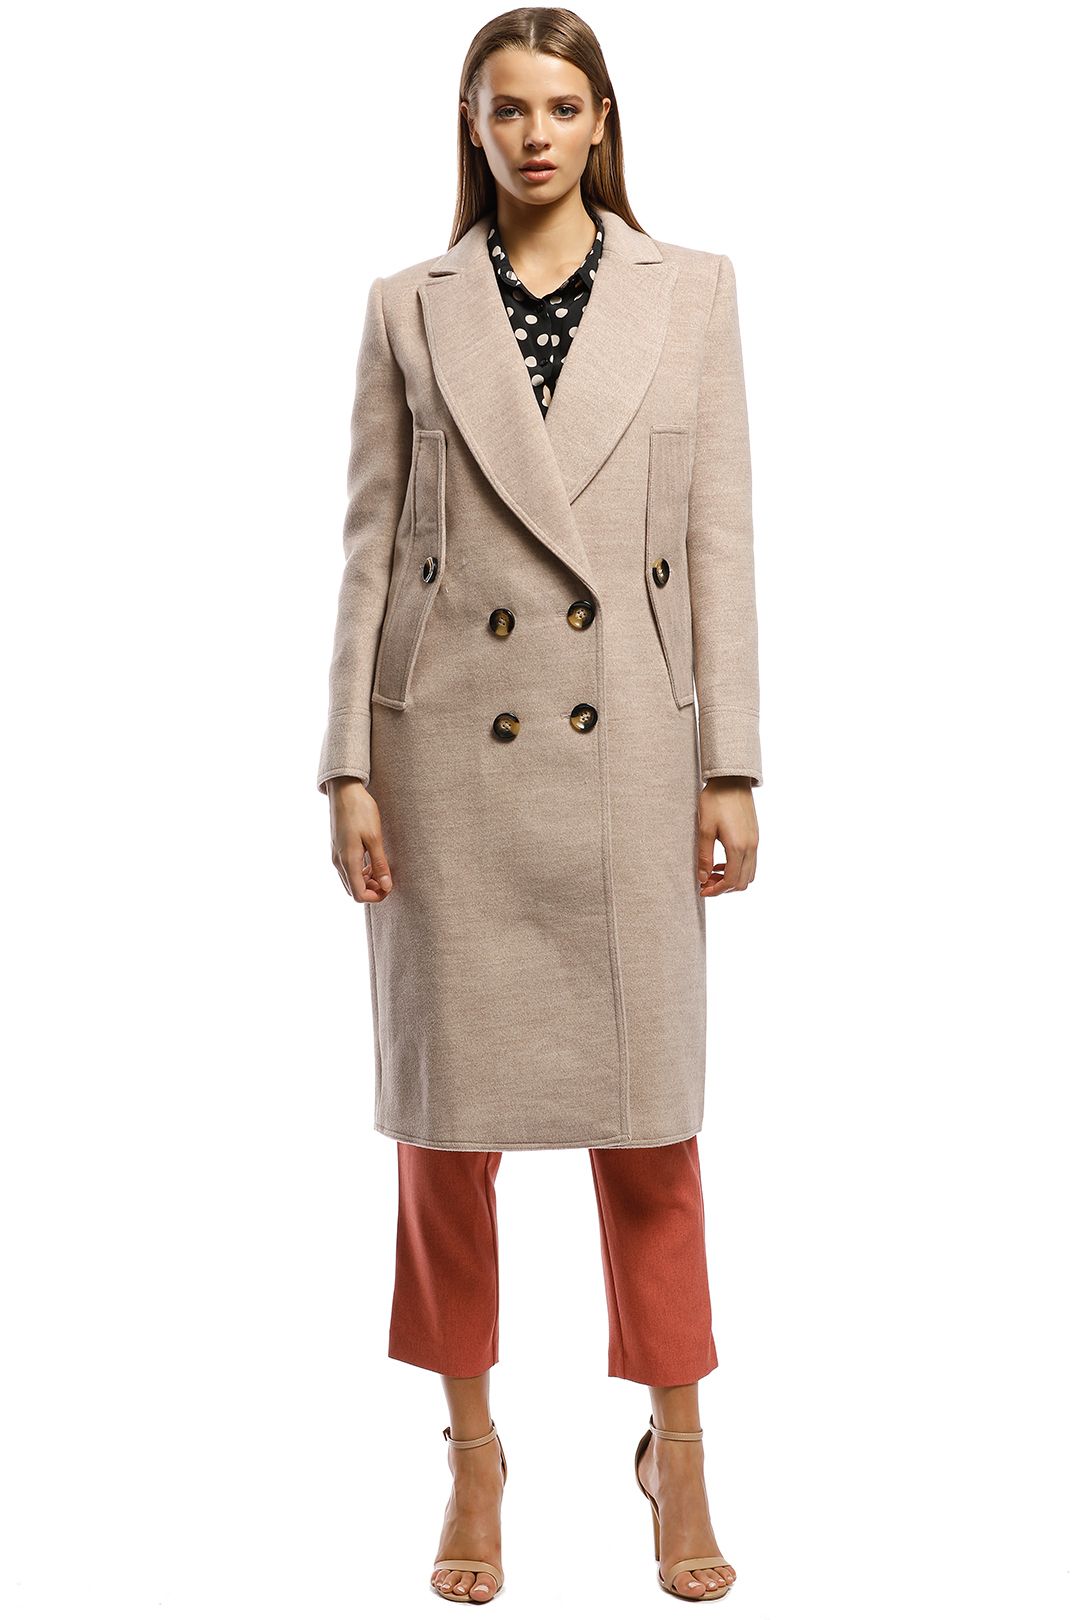 CMEO Collective - Held Up Coat - Brown - Front